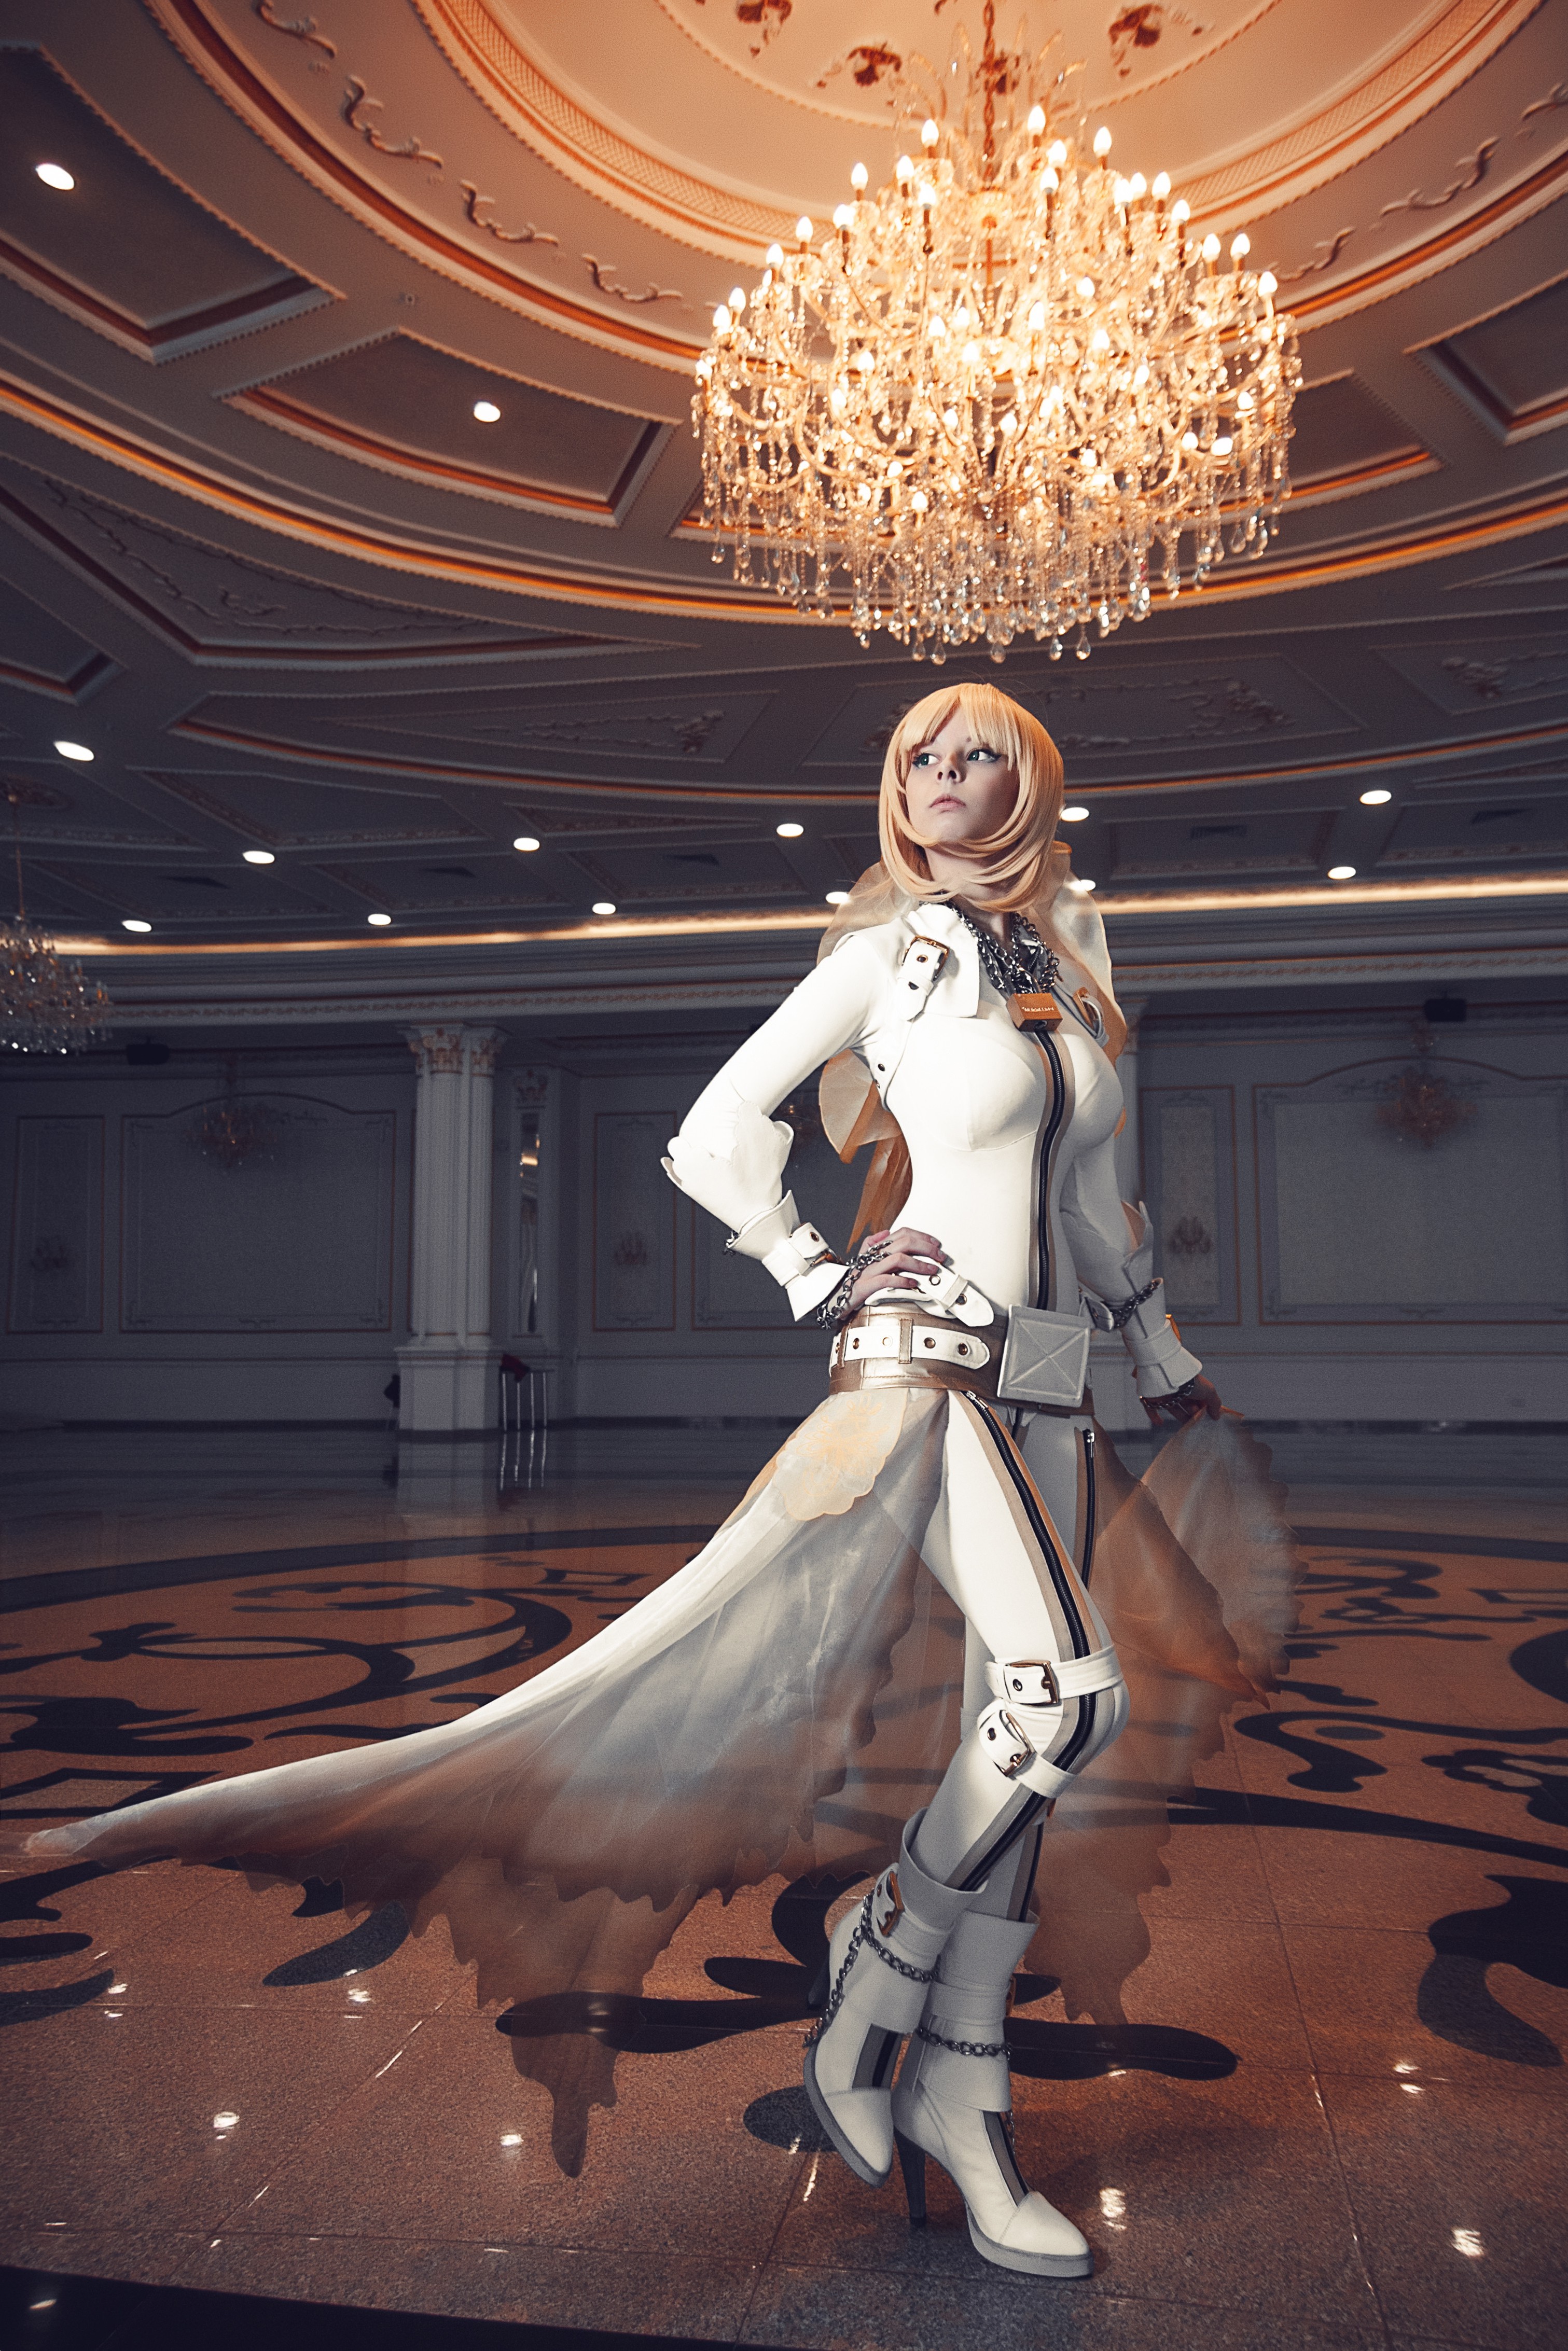 suits, Boots, Cosplay,  Saber Bride, Long Hair, Blonde, Blue Eyes, Leather Boots, Leather Clothing, Ballroom Wallpaper